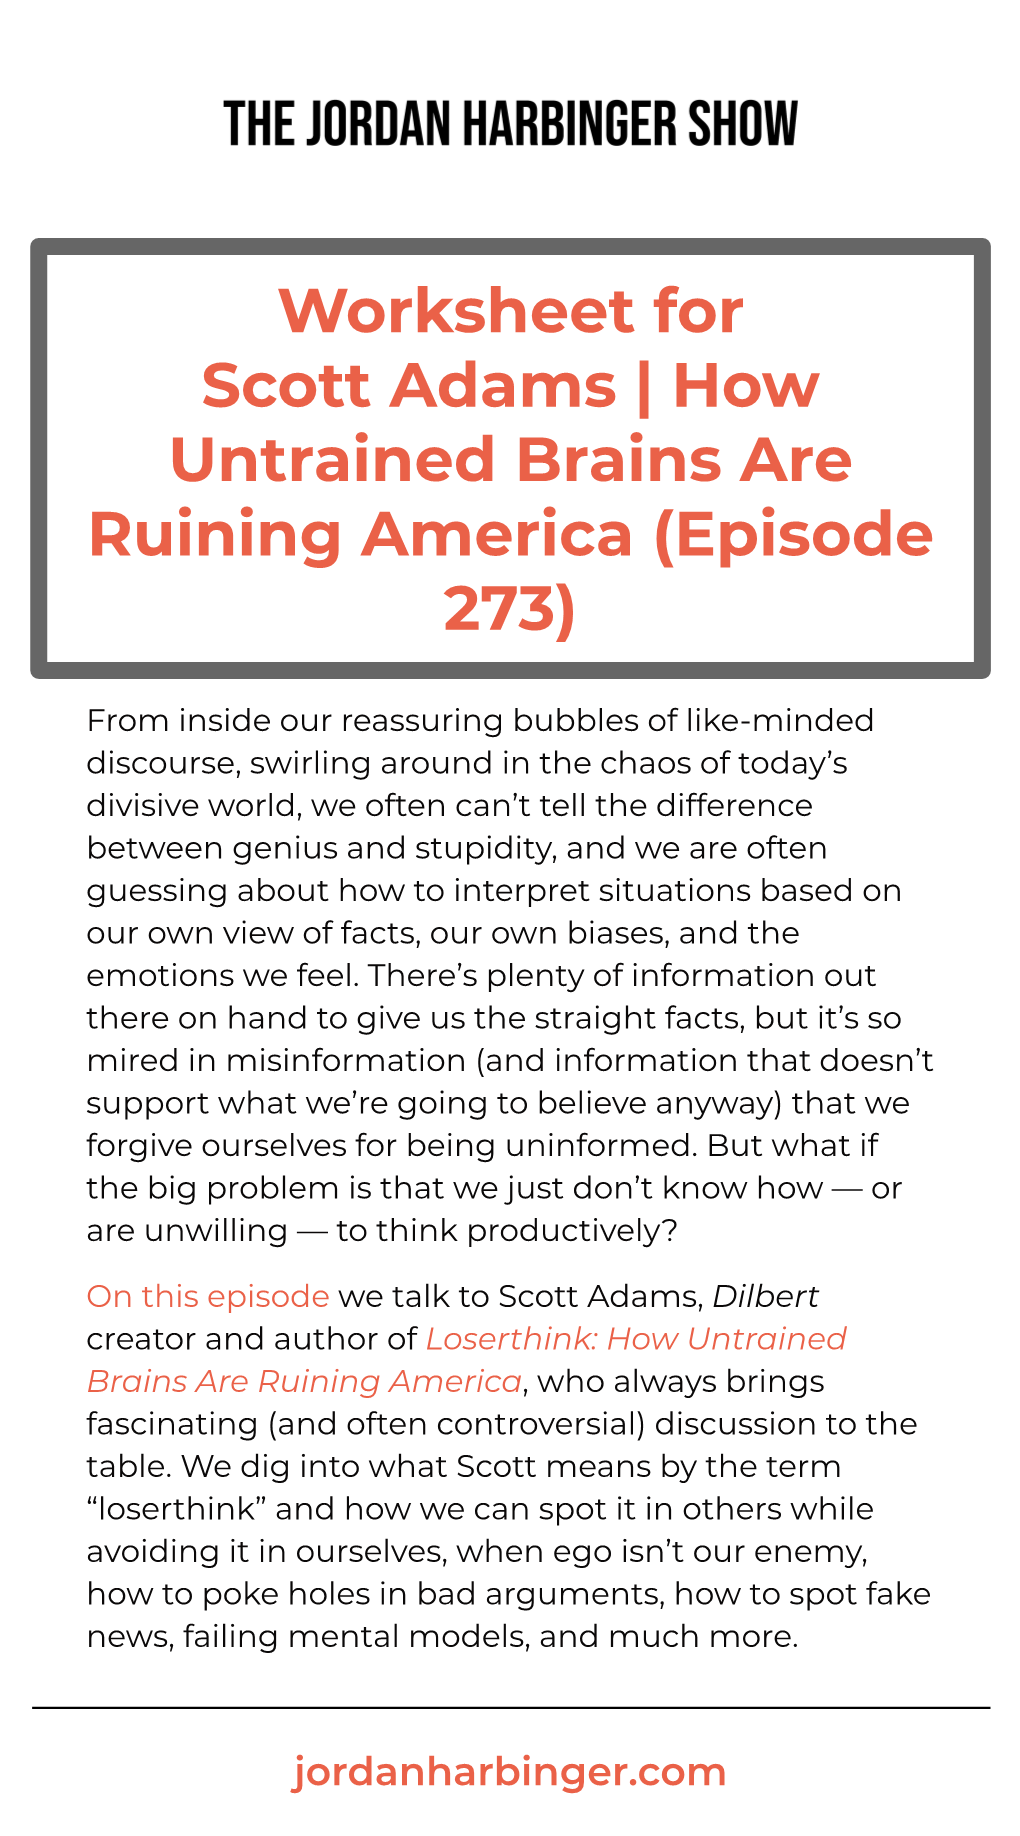 Worksheet for Scott Adams | How Untrained Brains Are Ruining America (Episode 273)